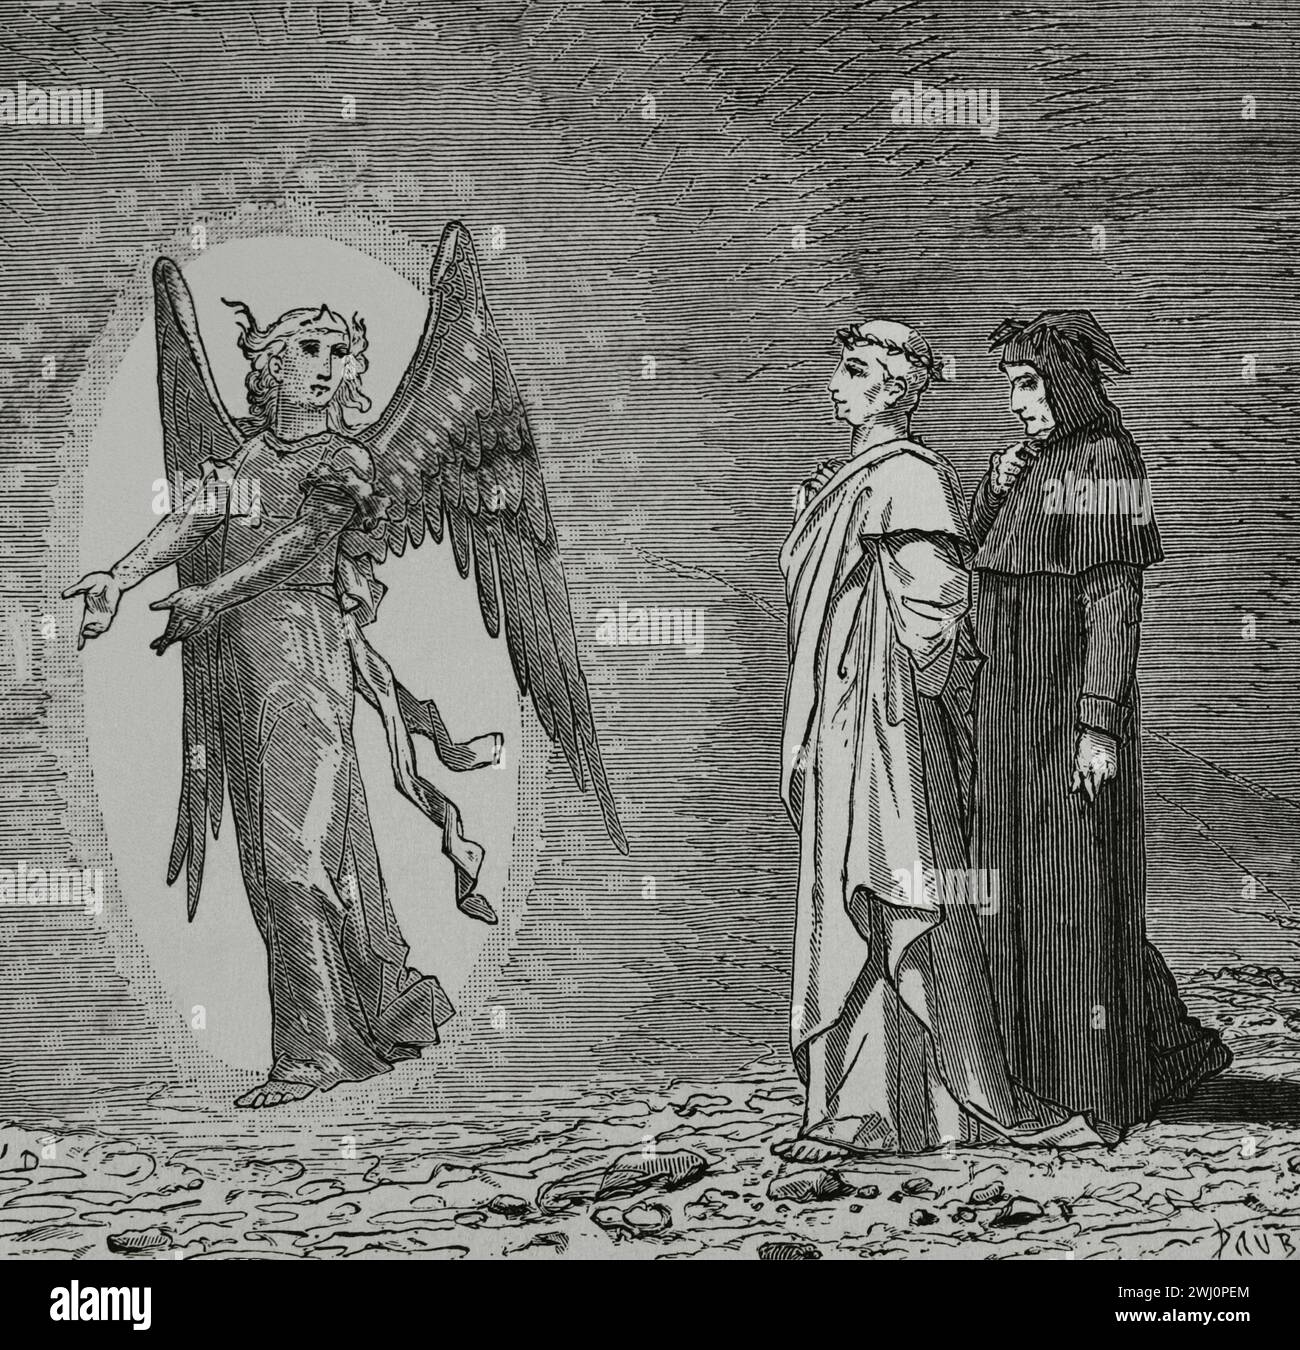 The Divine Comedy (1307-1321). Italian narrative poem by the Italian poet Dante Alighieri (1265-1321). Purgatory. 'When we had reached the blessed Angel...' Illustration by Yann Dargent (1824-1899). Engraving. Published in Paris, 1888. Stock Photo